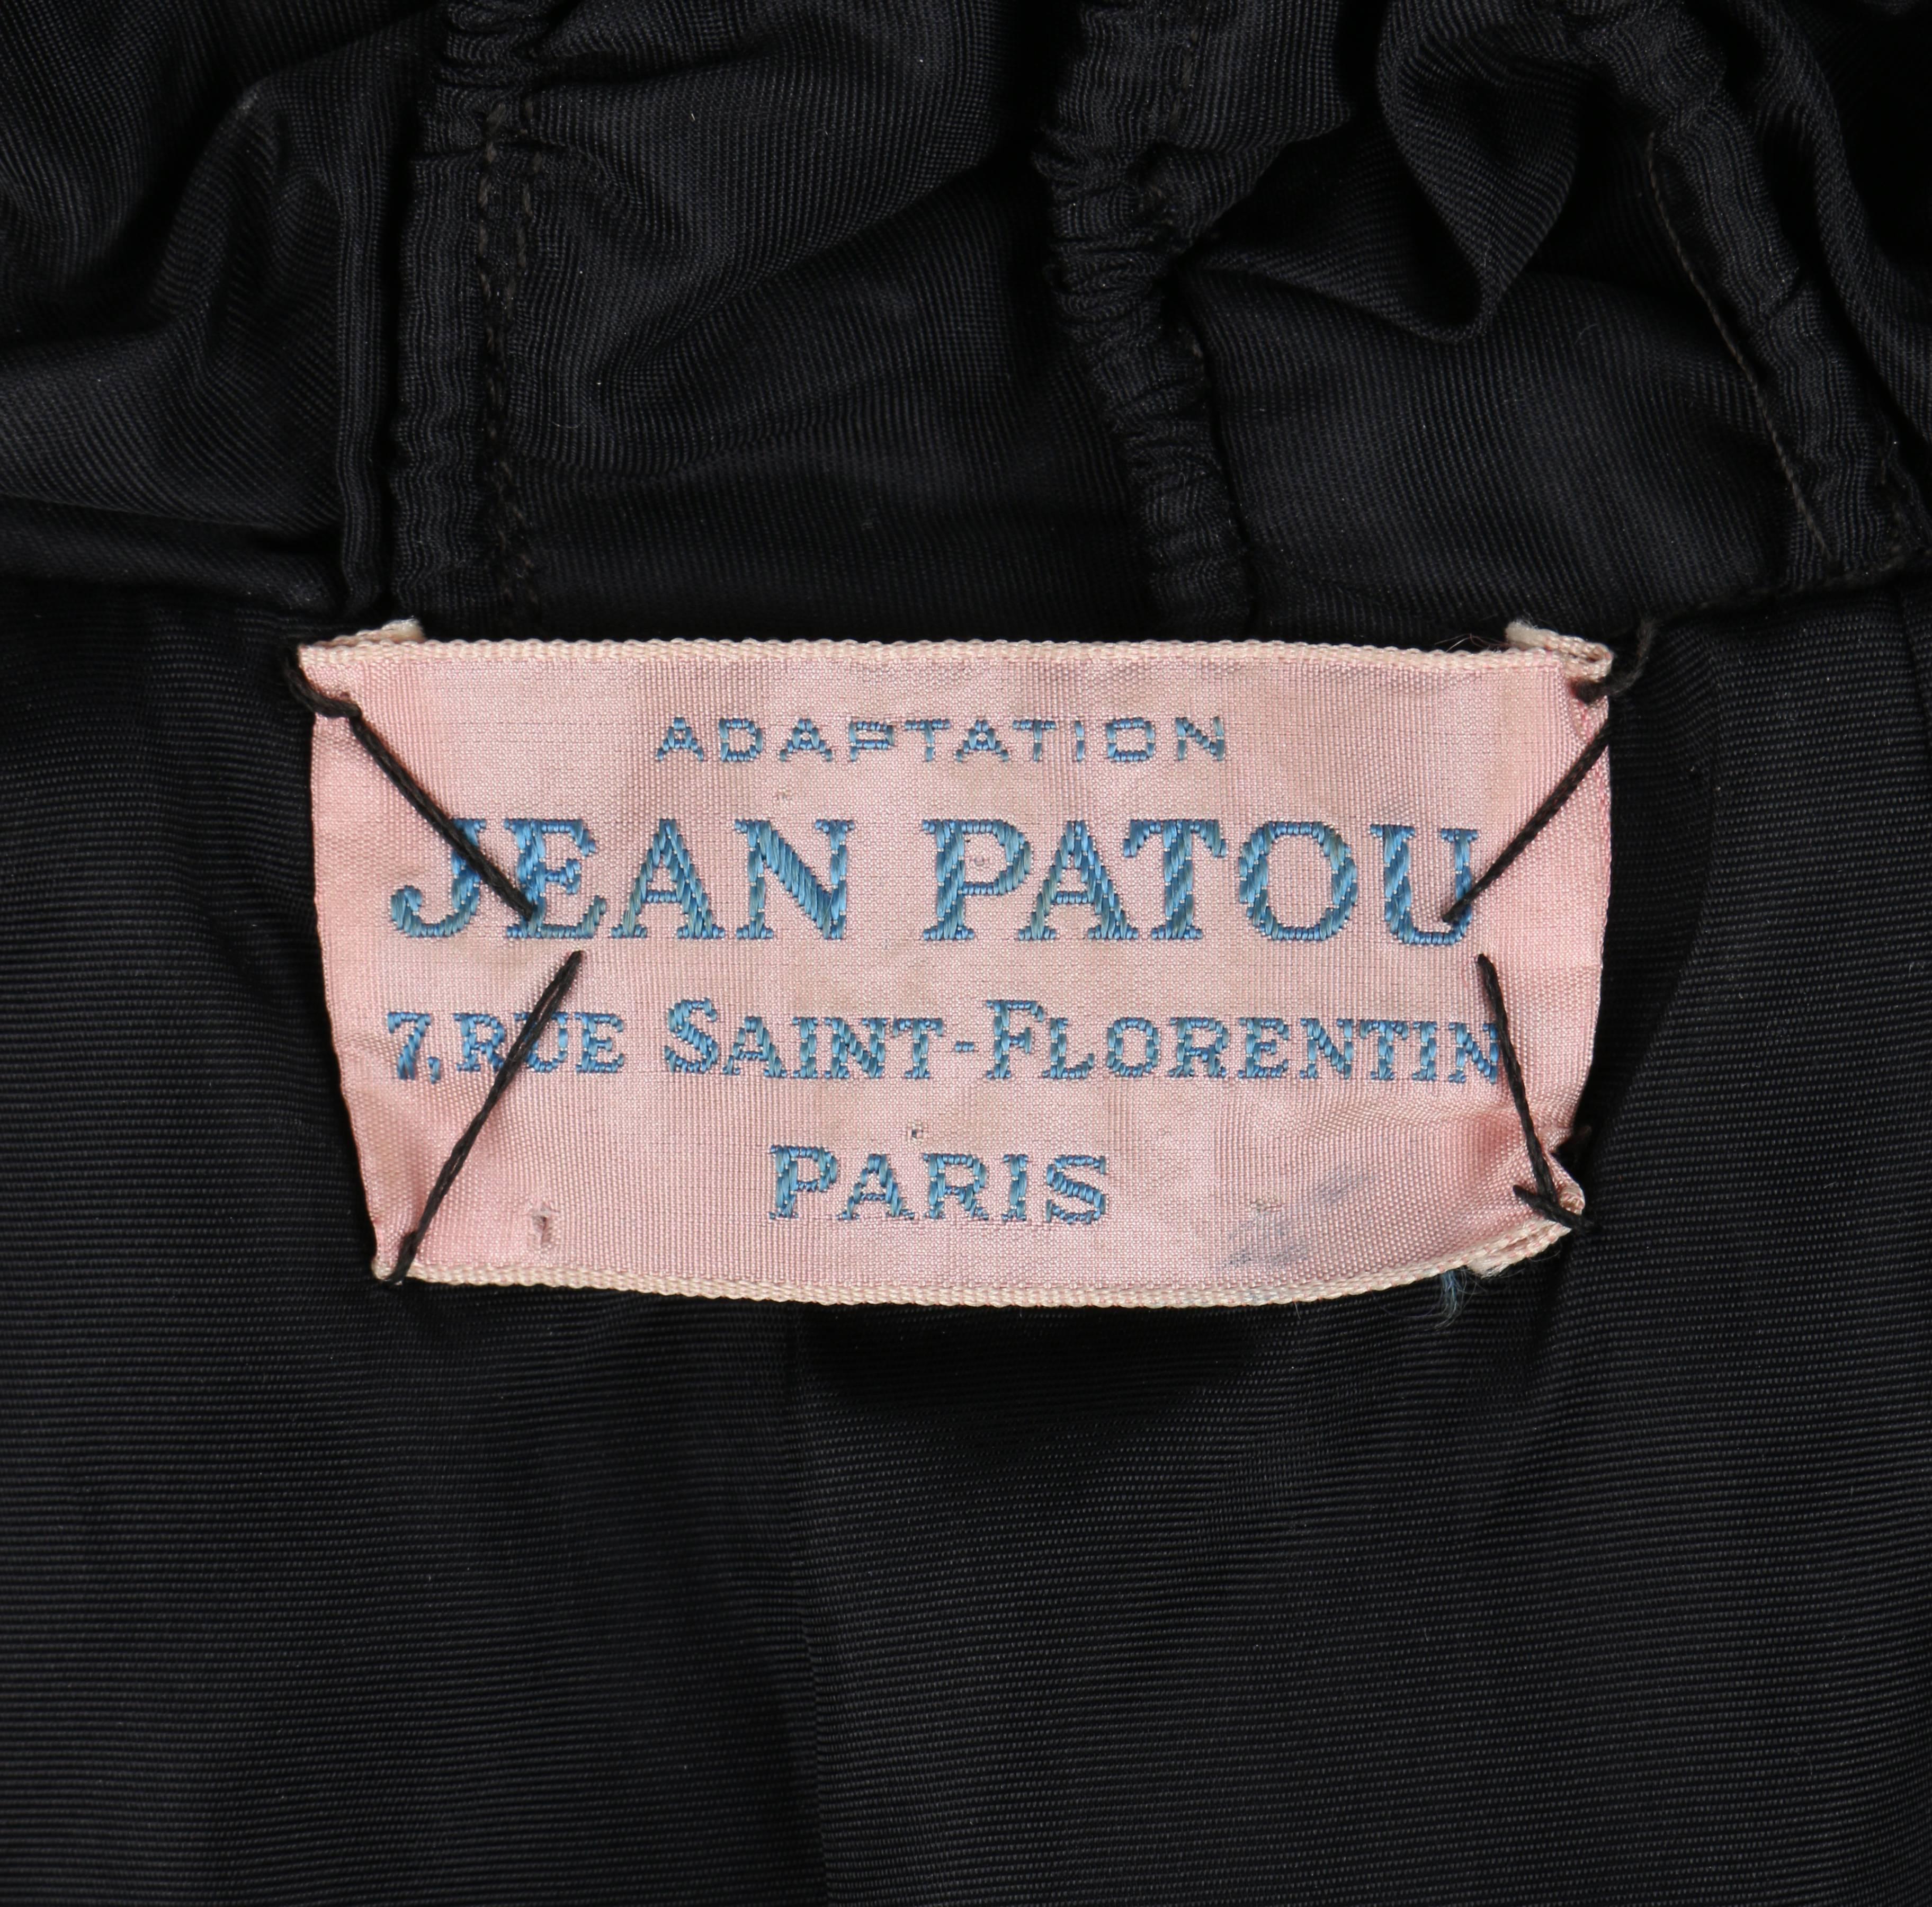 JEAN PATOU Adaptation c.1930's Black Silk Jacket Ruffled Capelet  For Sale 2